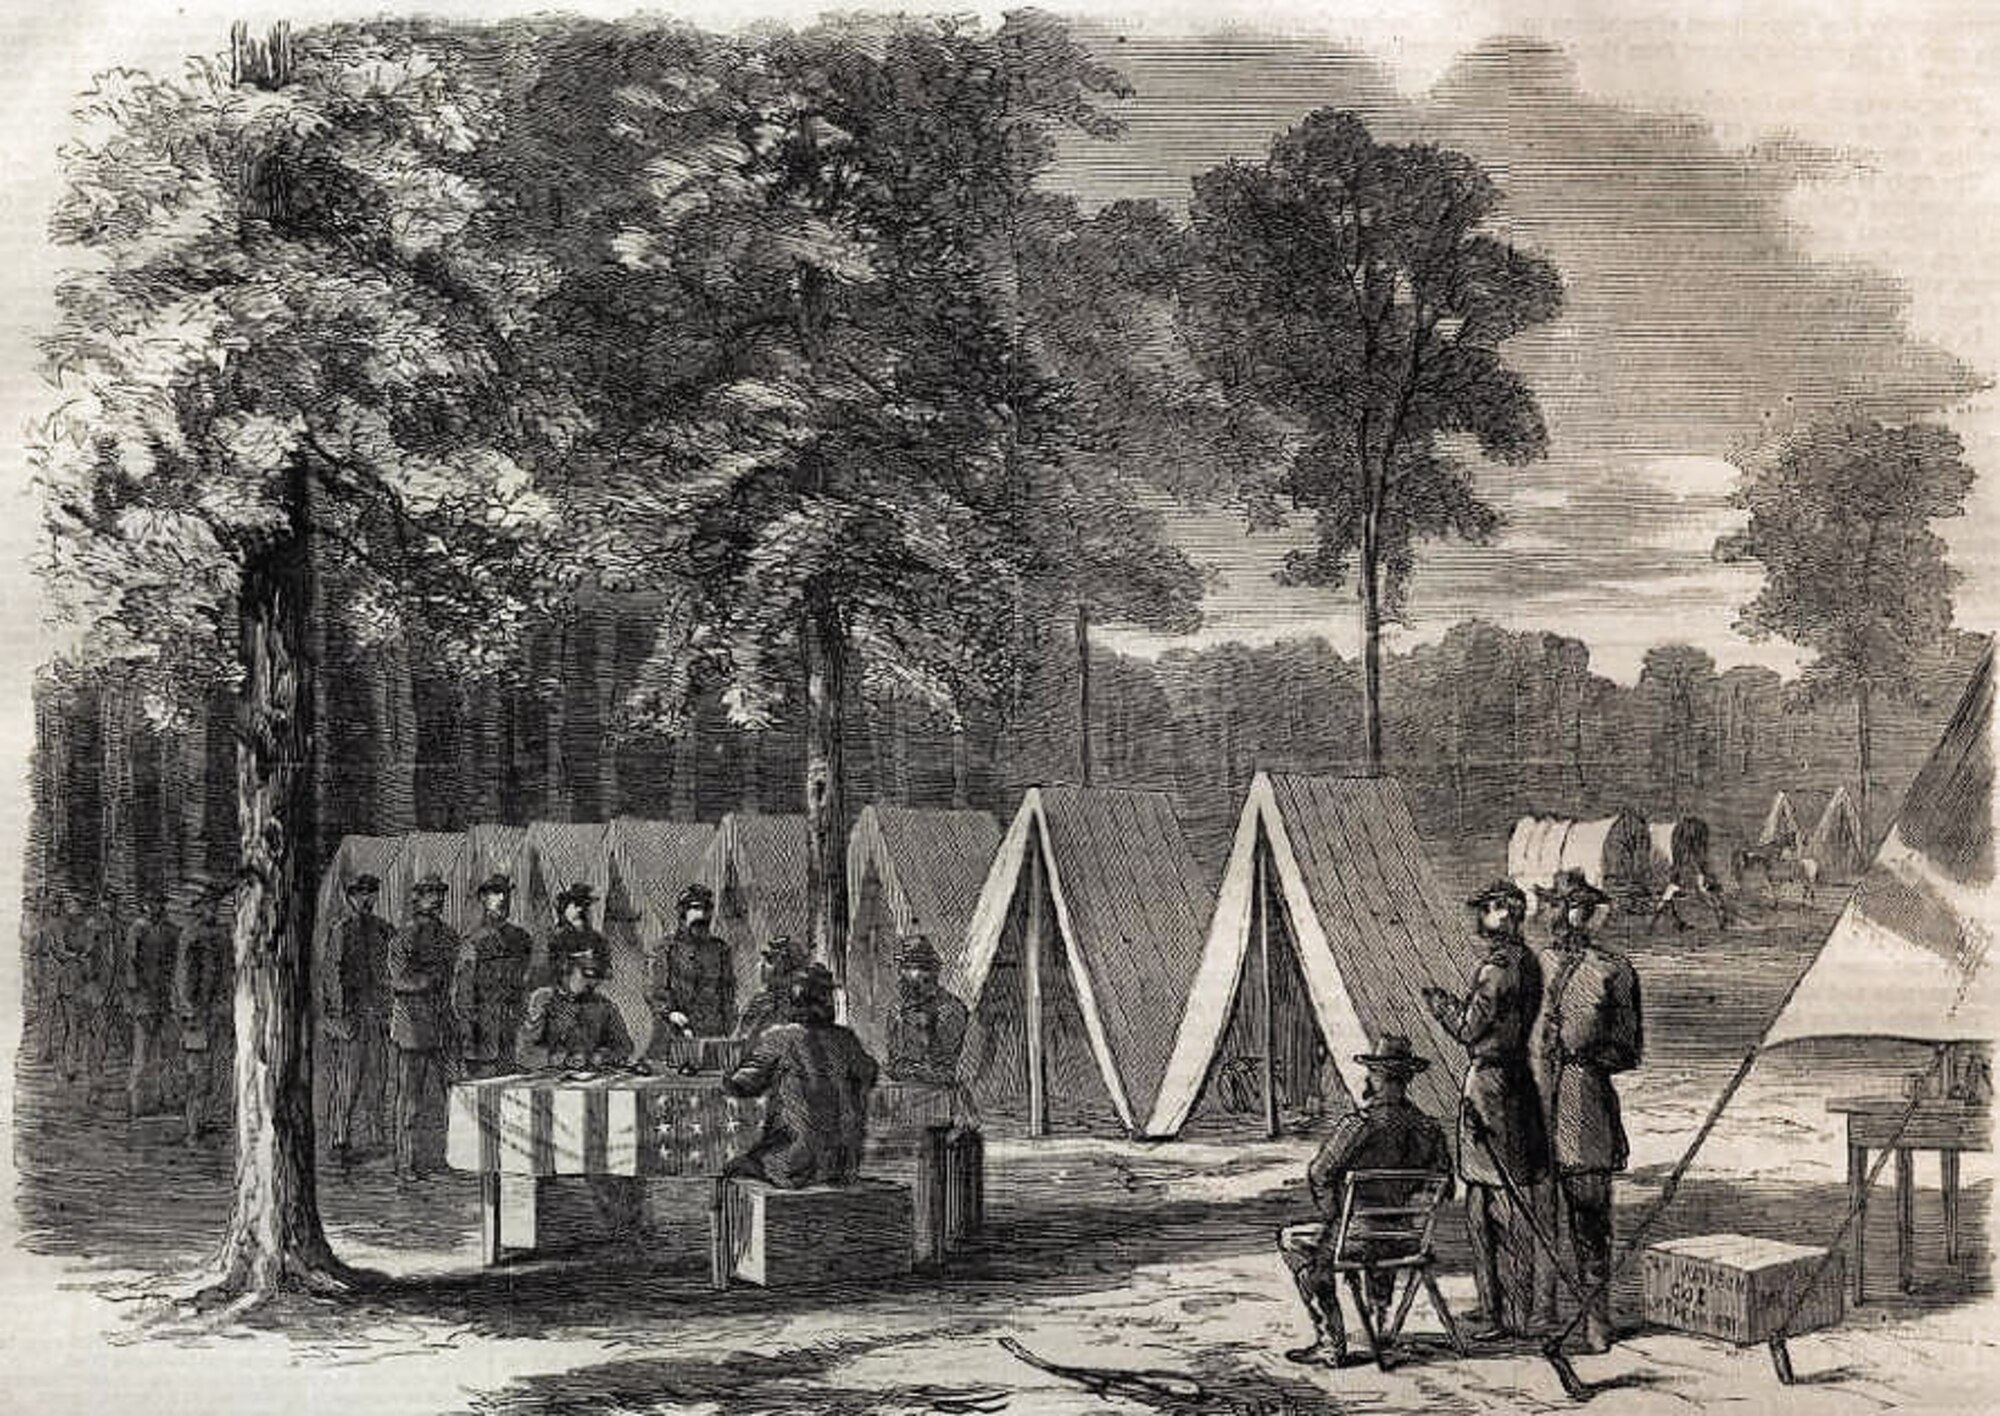 Artwork published in Harper's Weekly shows Union Soldiers from Pennsylvania casting absentee ballots during the 1864 presidential election. (Image courtesy of the Smithsonian Institution Library) 